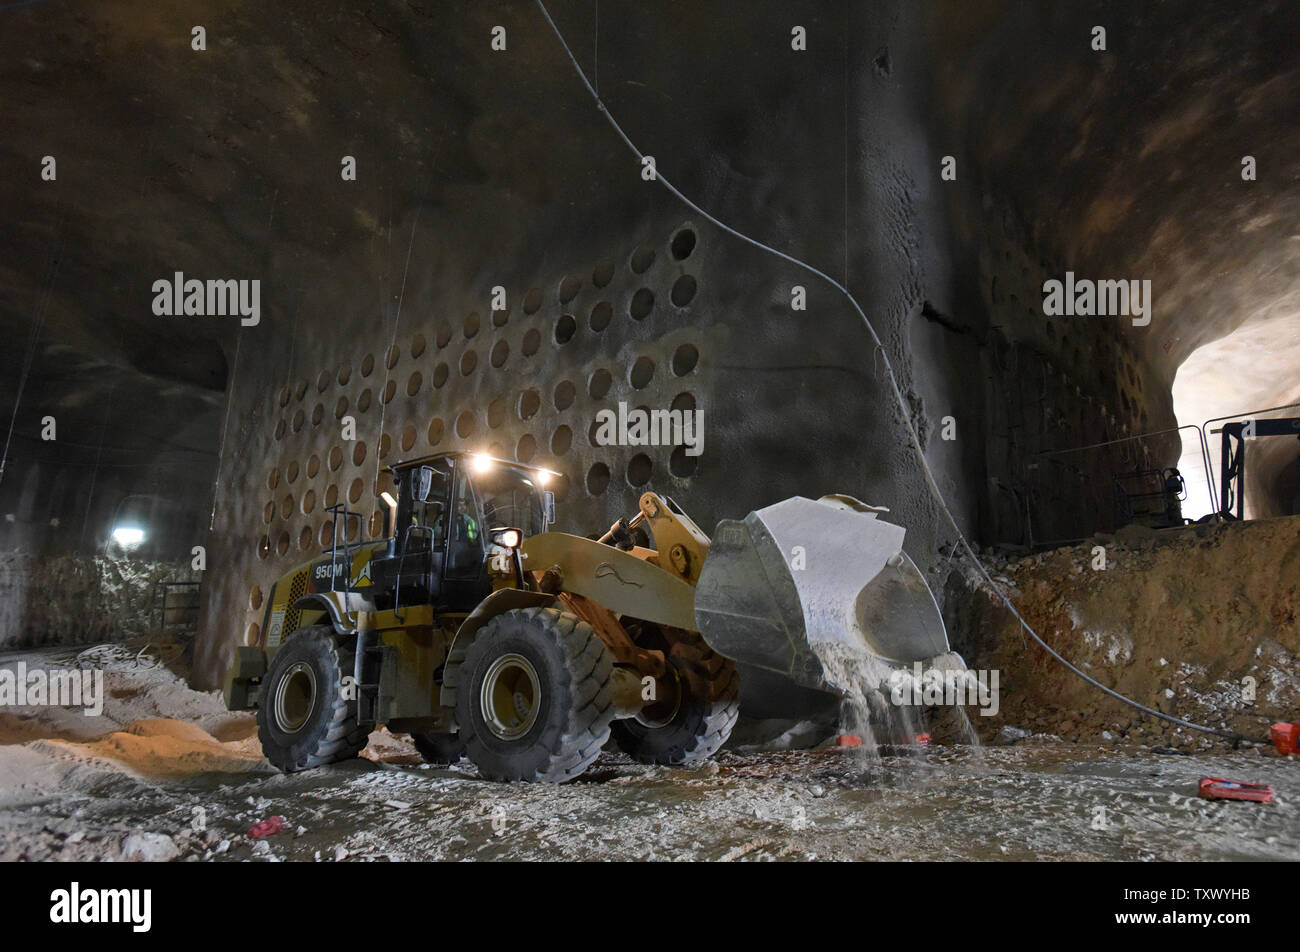 Heavy equipment moves past partially constructed catacomb burial plots in the underground burial tunnels at the Givat Shaul Cemetery, Har HaMenuchot, in Jerusalem, Israel, November 26, 2017.  Due to overcrowding and lack of land for burial sites in Jerusalem, the religious burial society called Chevra Kadisha, is building the massive underground burial site that will provide space for more than 22,000 graves.   Photo by Debbie Hill/UPI Stock Photo